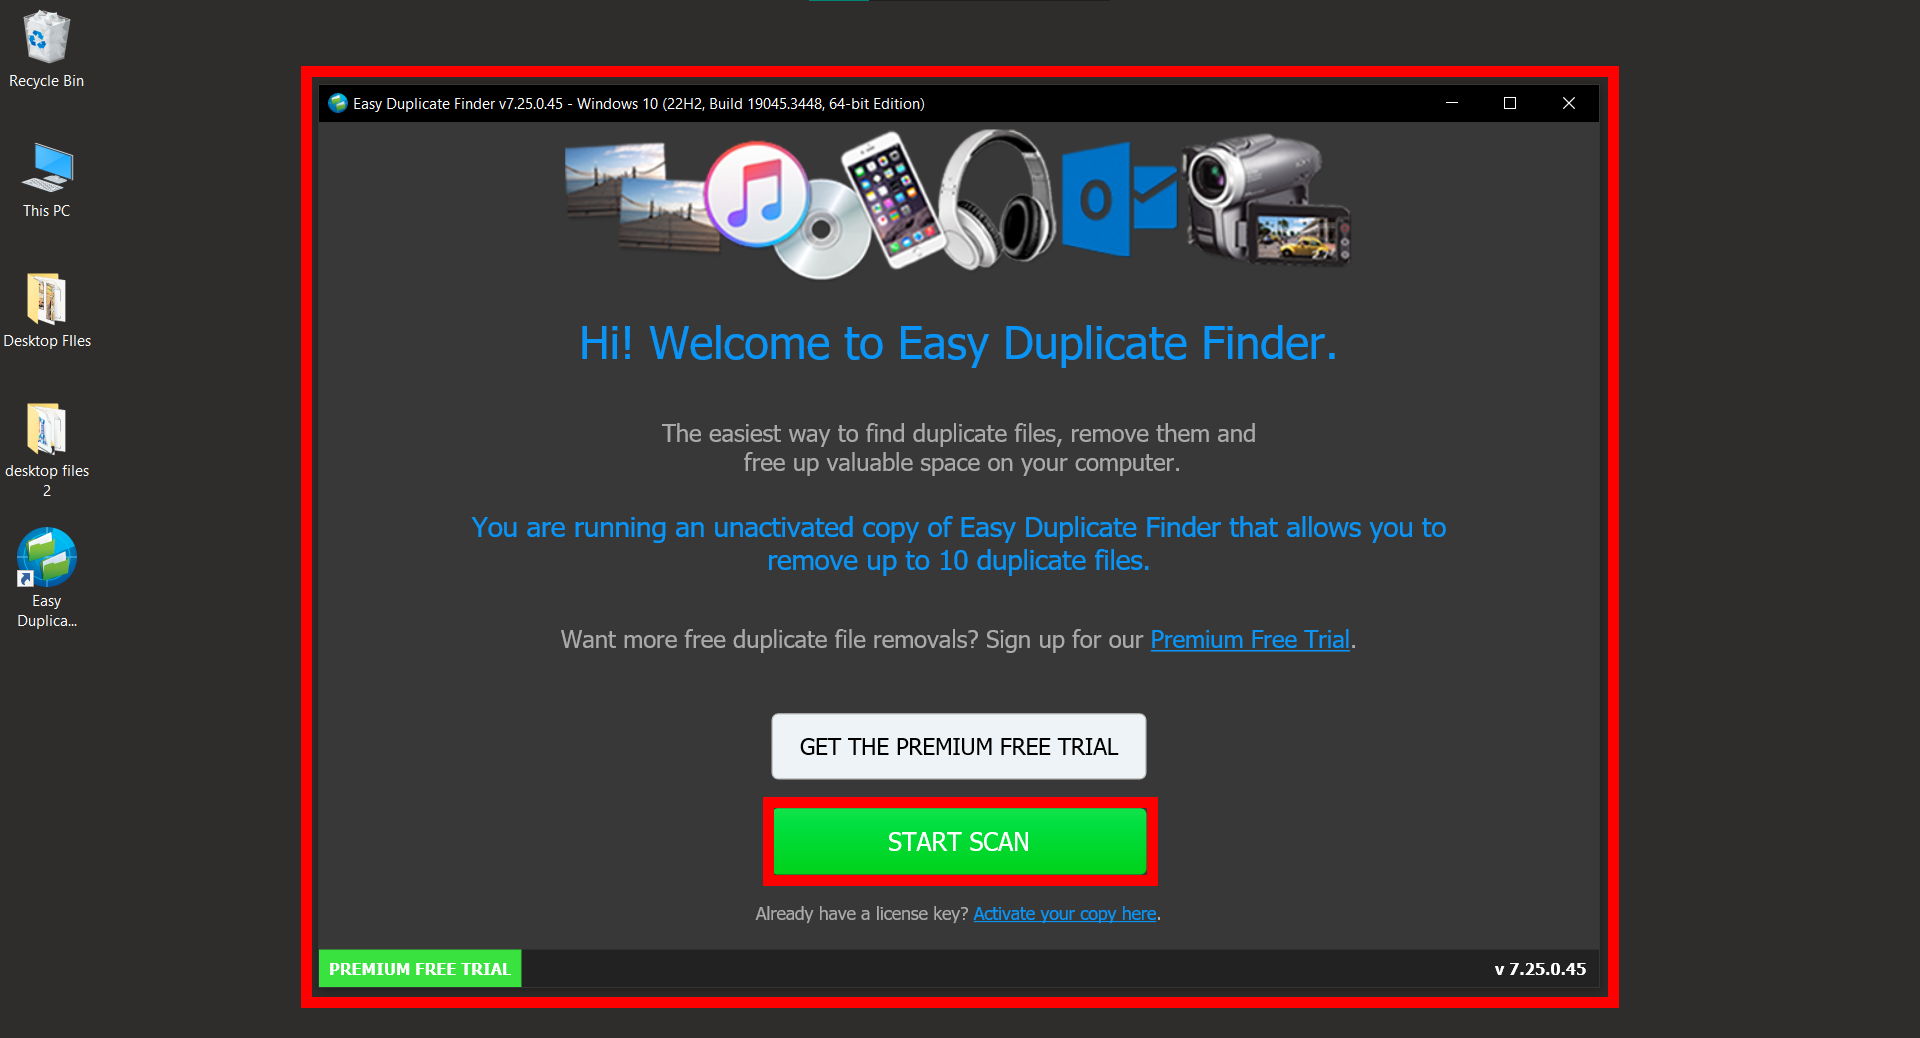 How To Use Easy Duplicate Finder to Remove Duplicate Files: Step 3